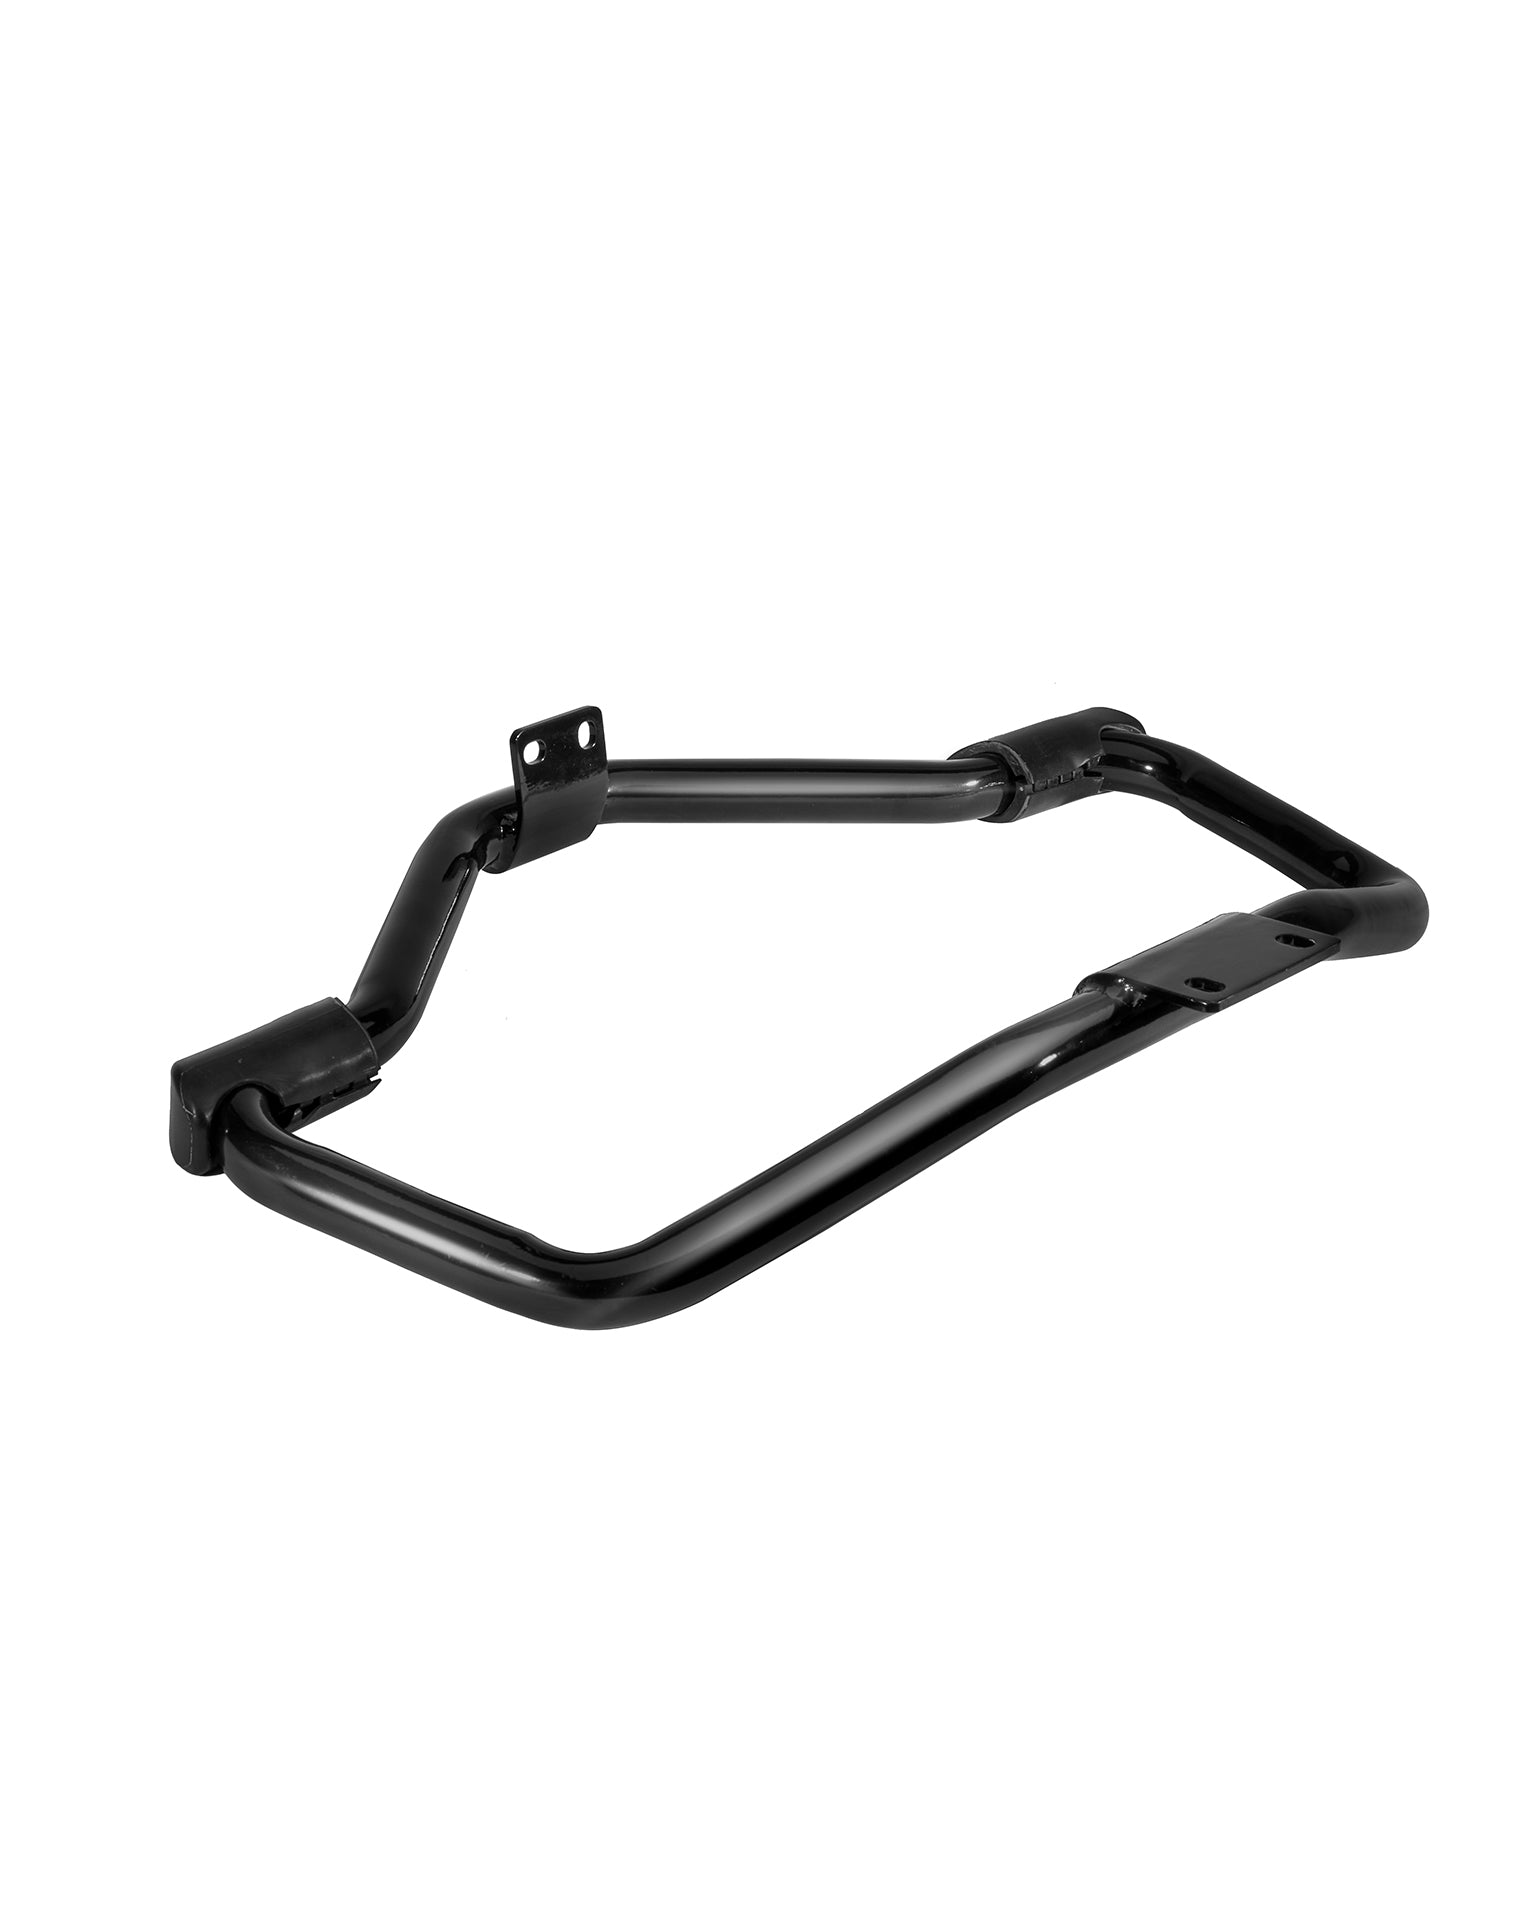 Viking Iron Born Motorcycle Crash Bar/Engine Guard for Harley Sportster SuperLow 1200T Gloss Black Side View